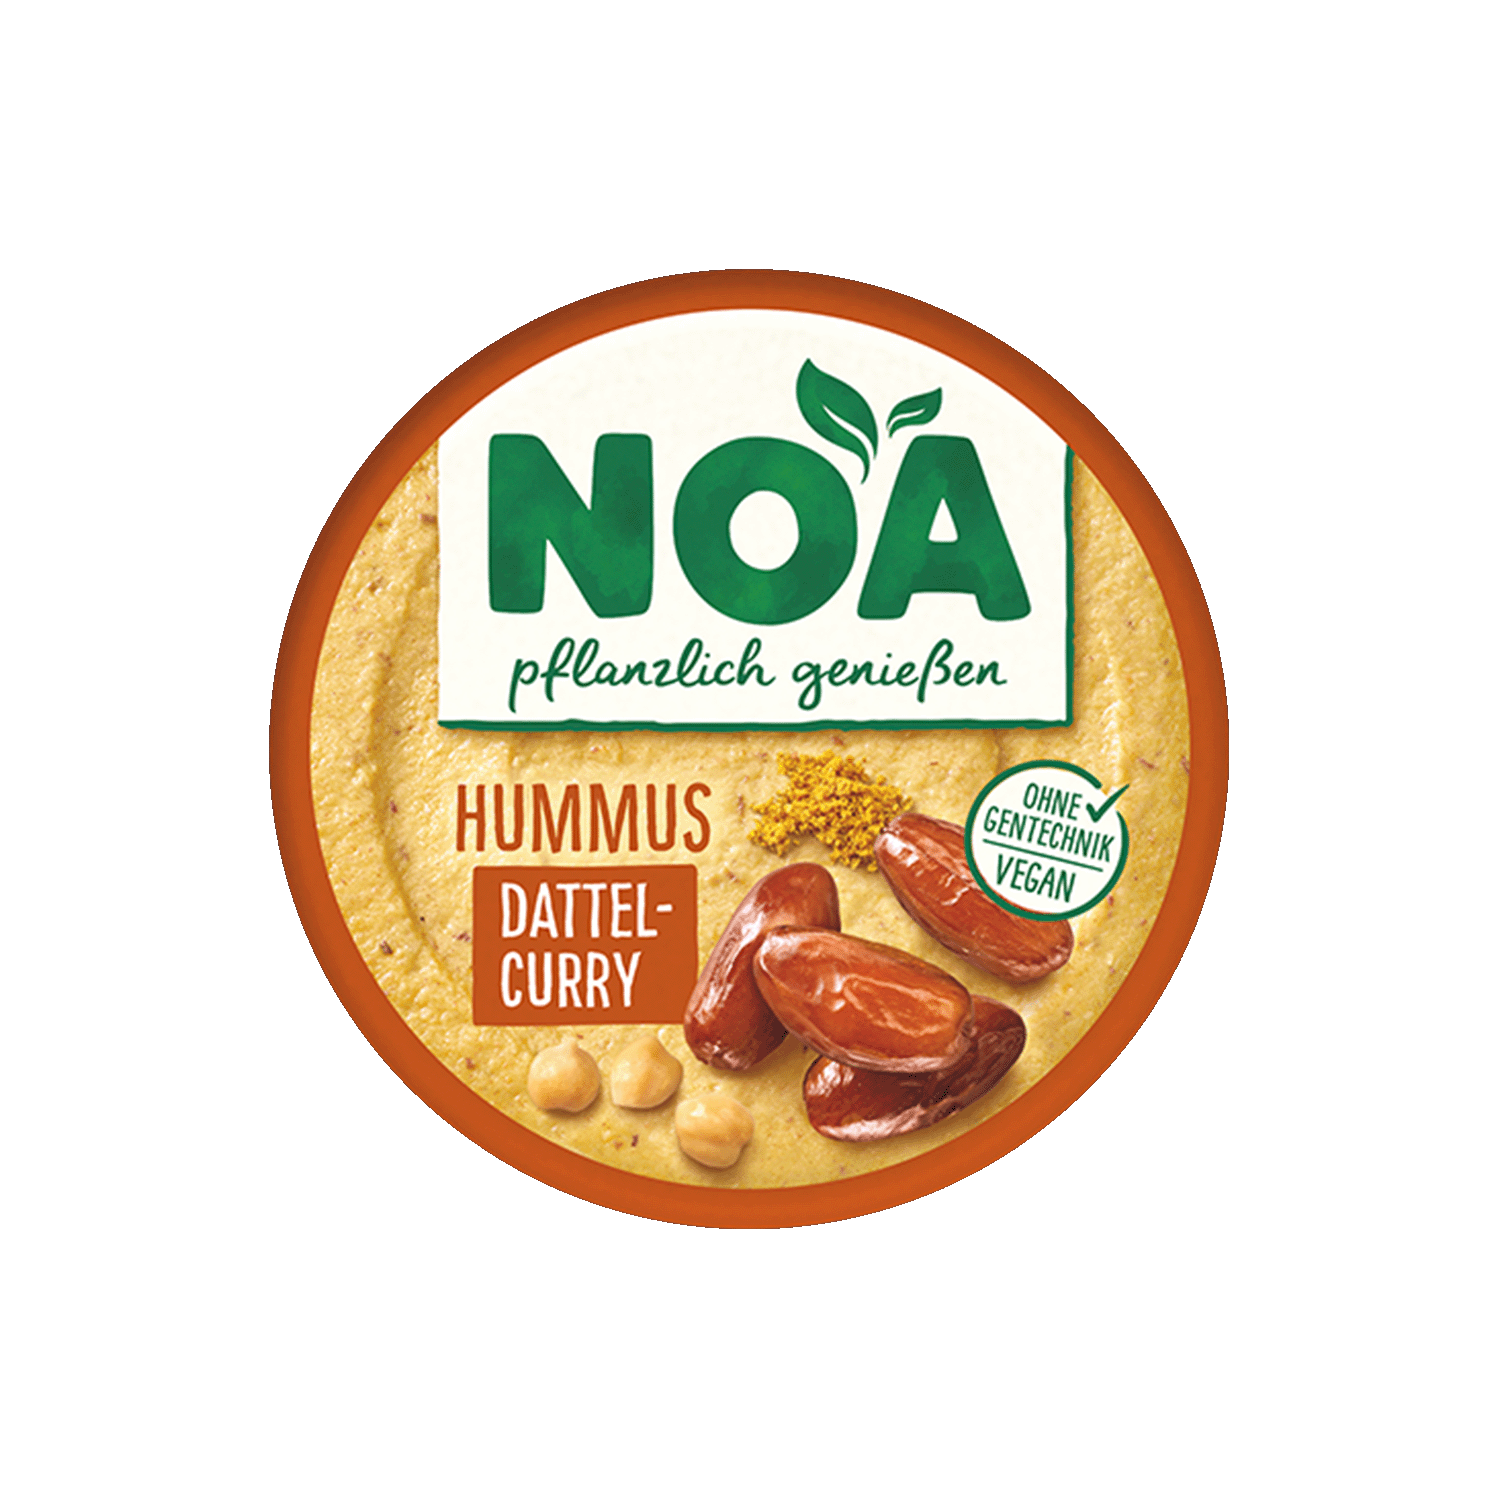 Hummus Date Curry, 175g